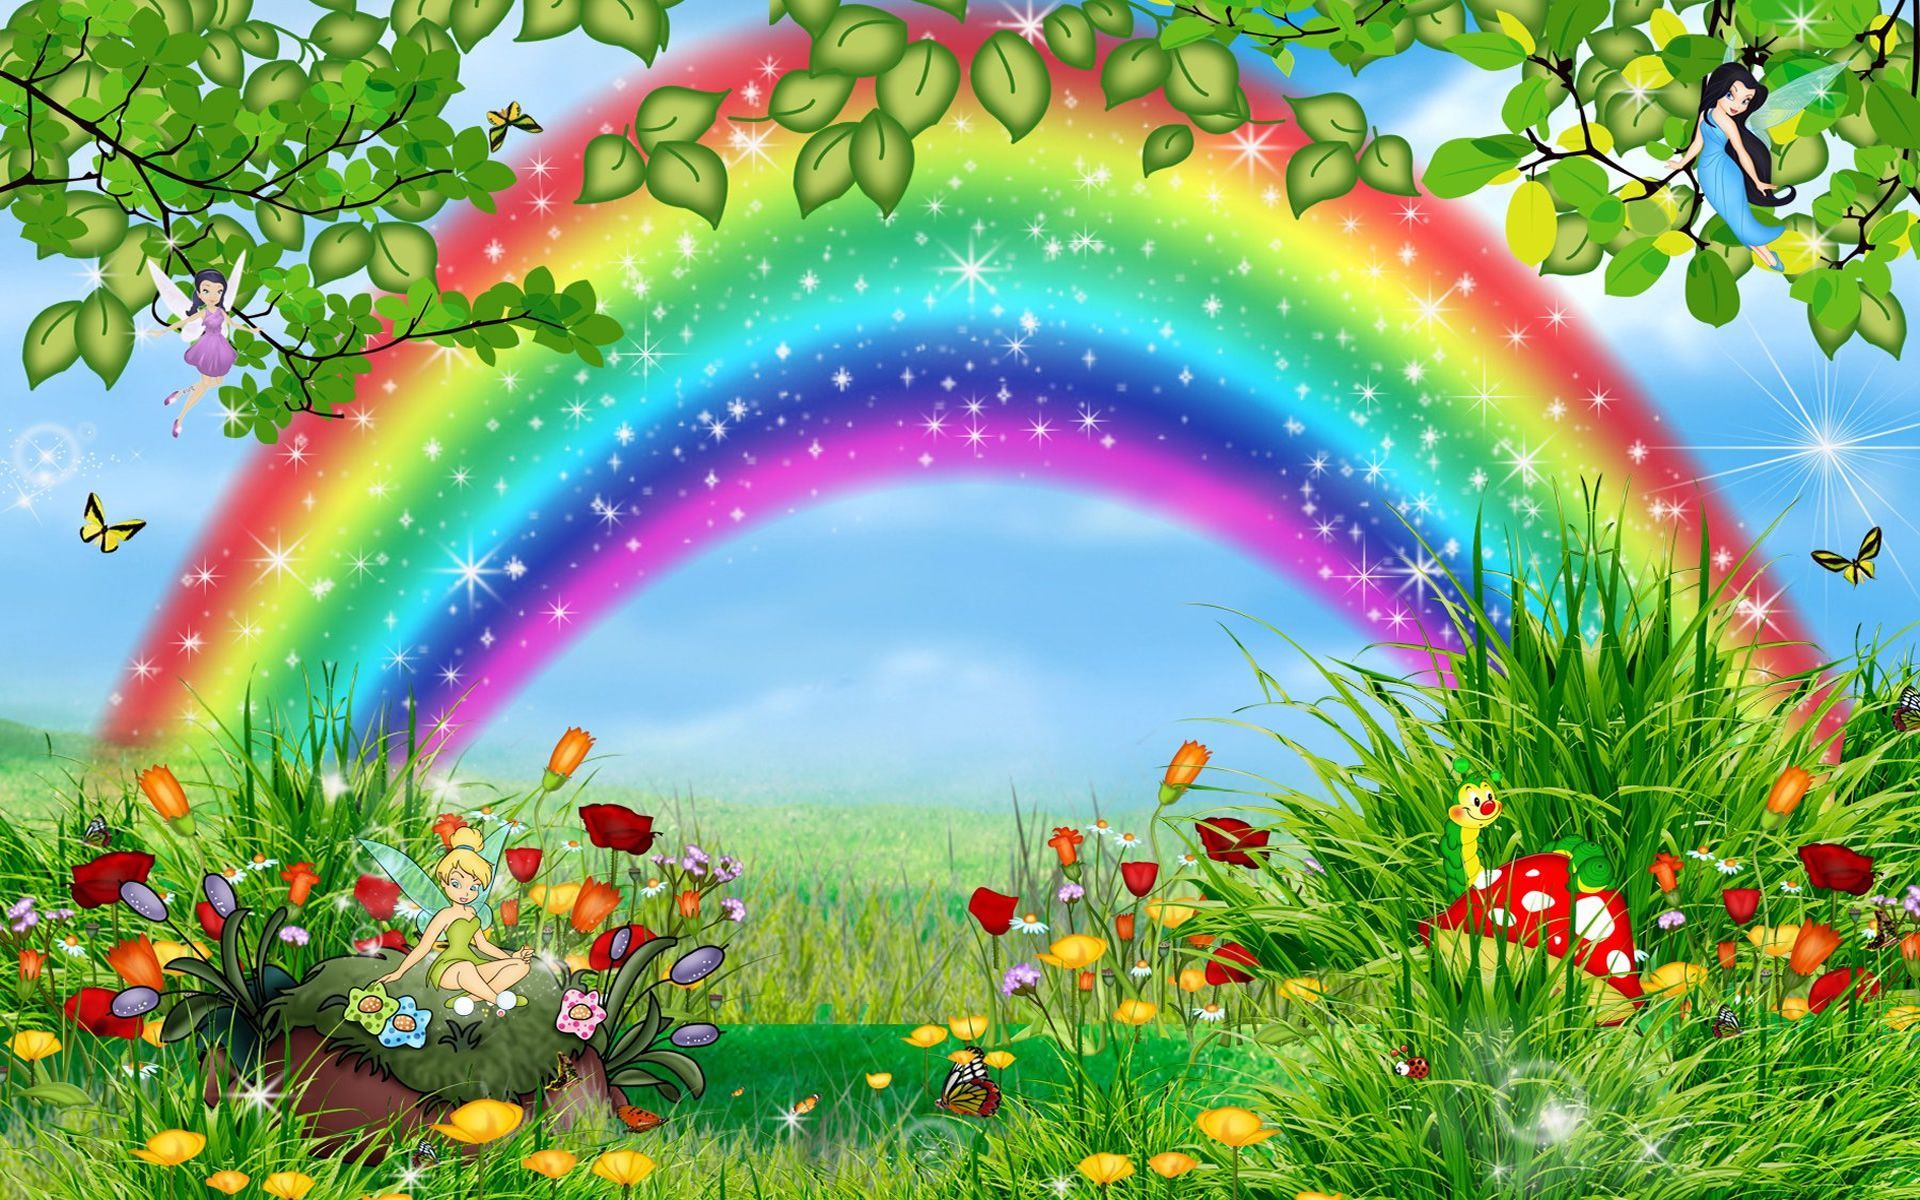 Rainbow Wallpapers For Desktop | HD Wallpapers | Pictures | Images ...